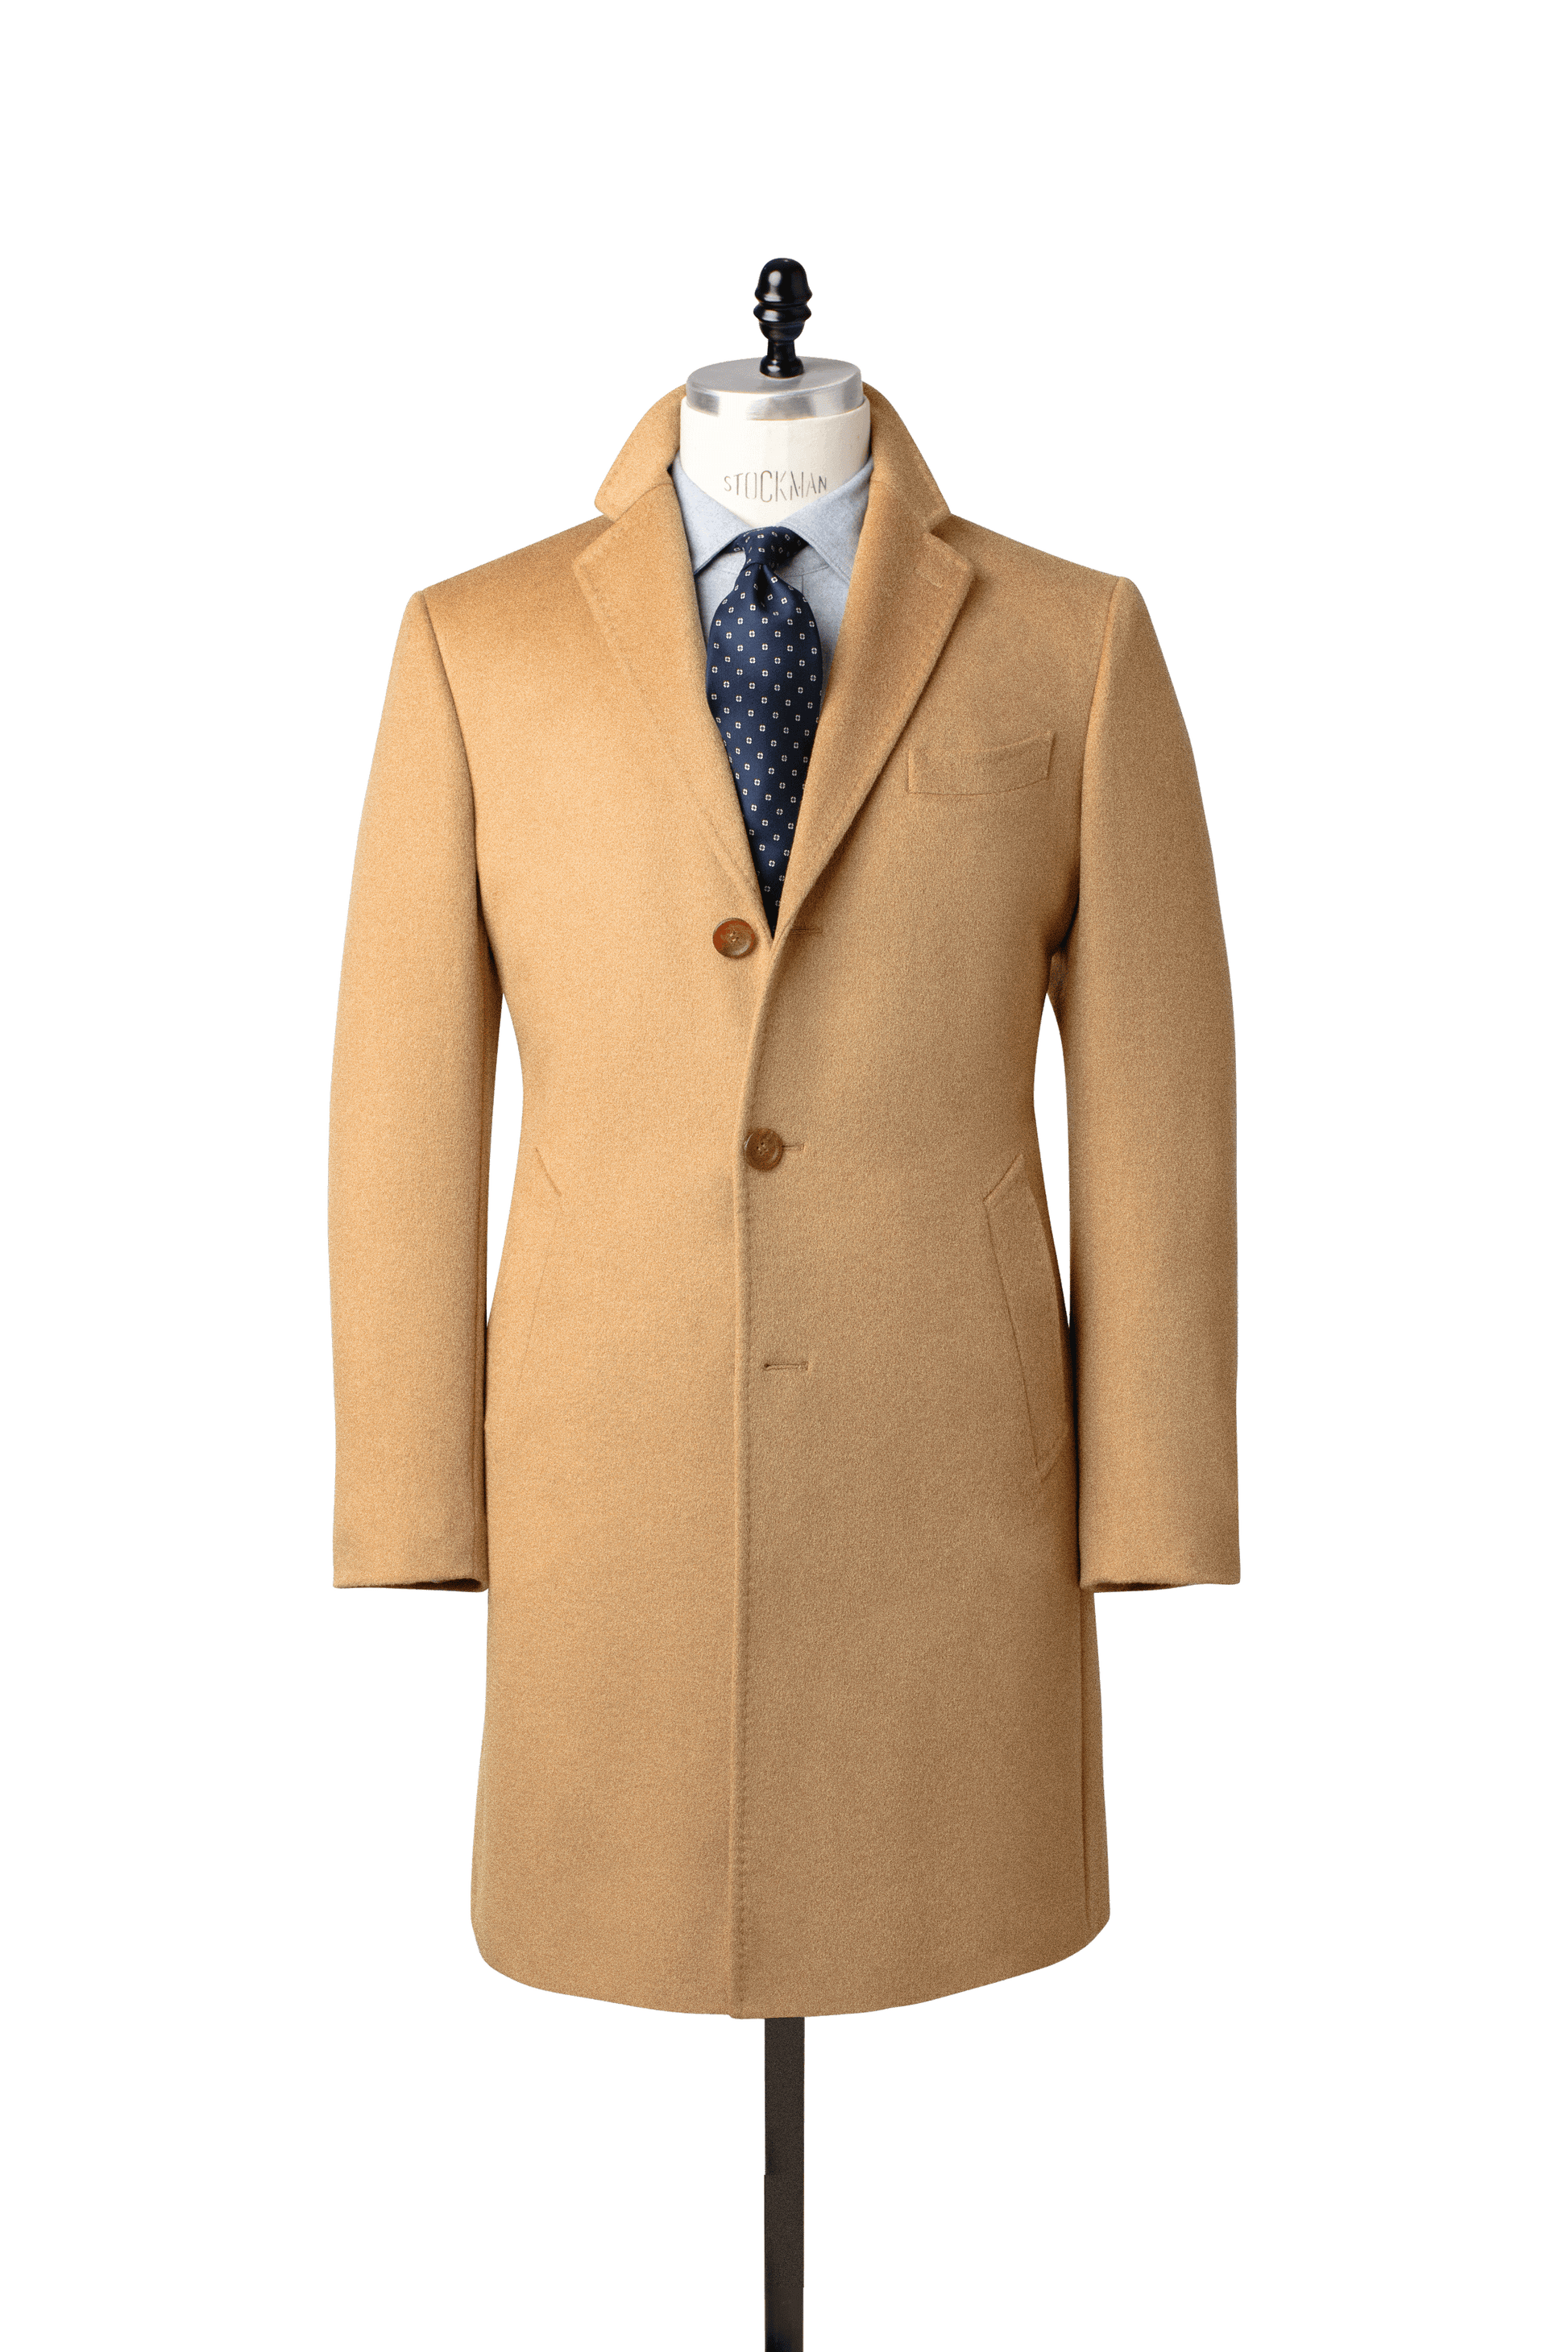 Knot Standard - KNOT STANDARD CAMEL OVERCOAT - Rent With Thred